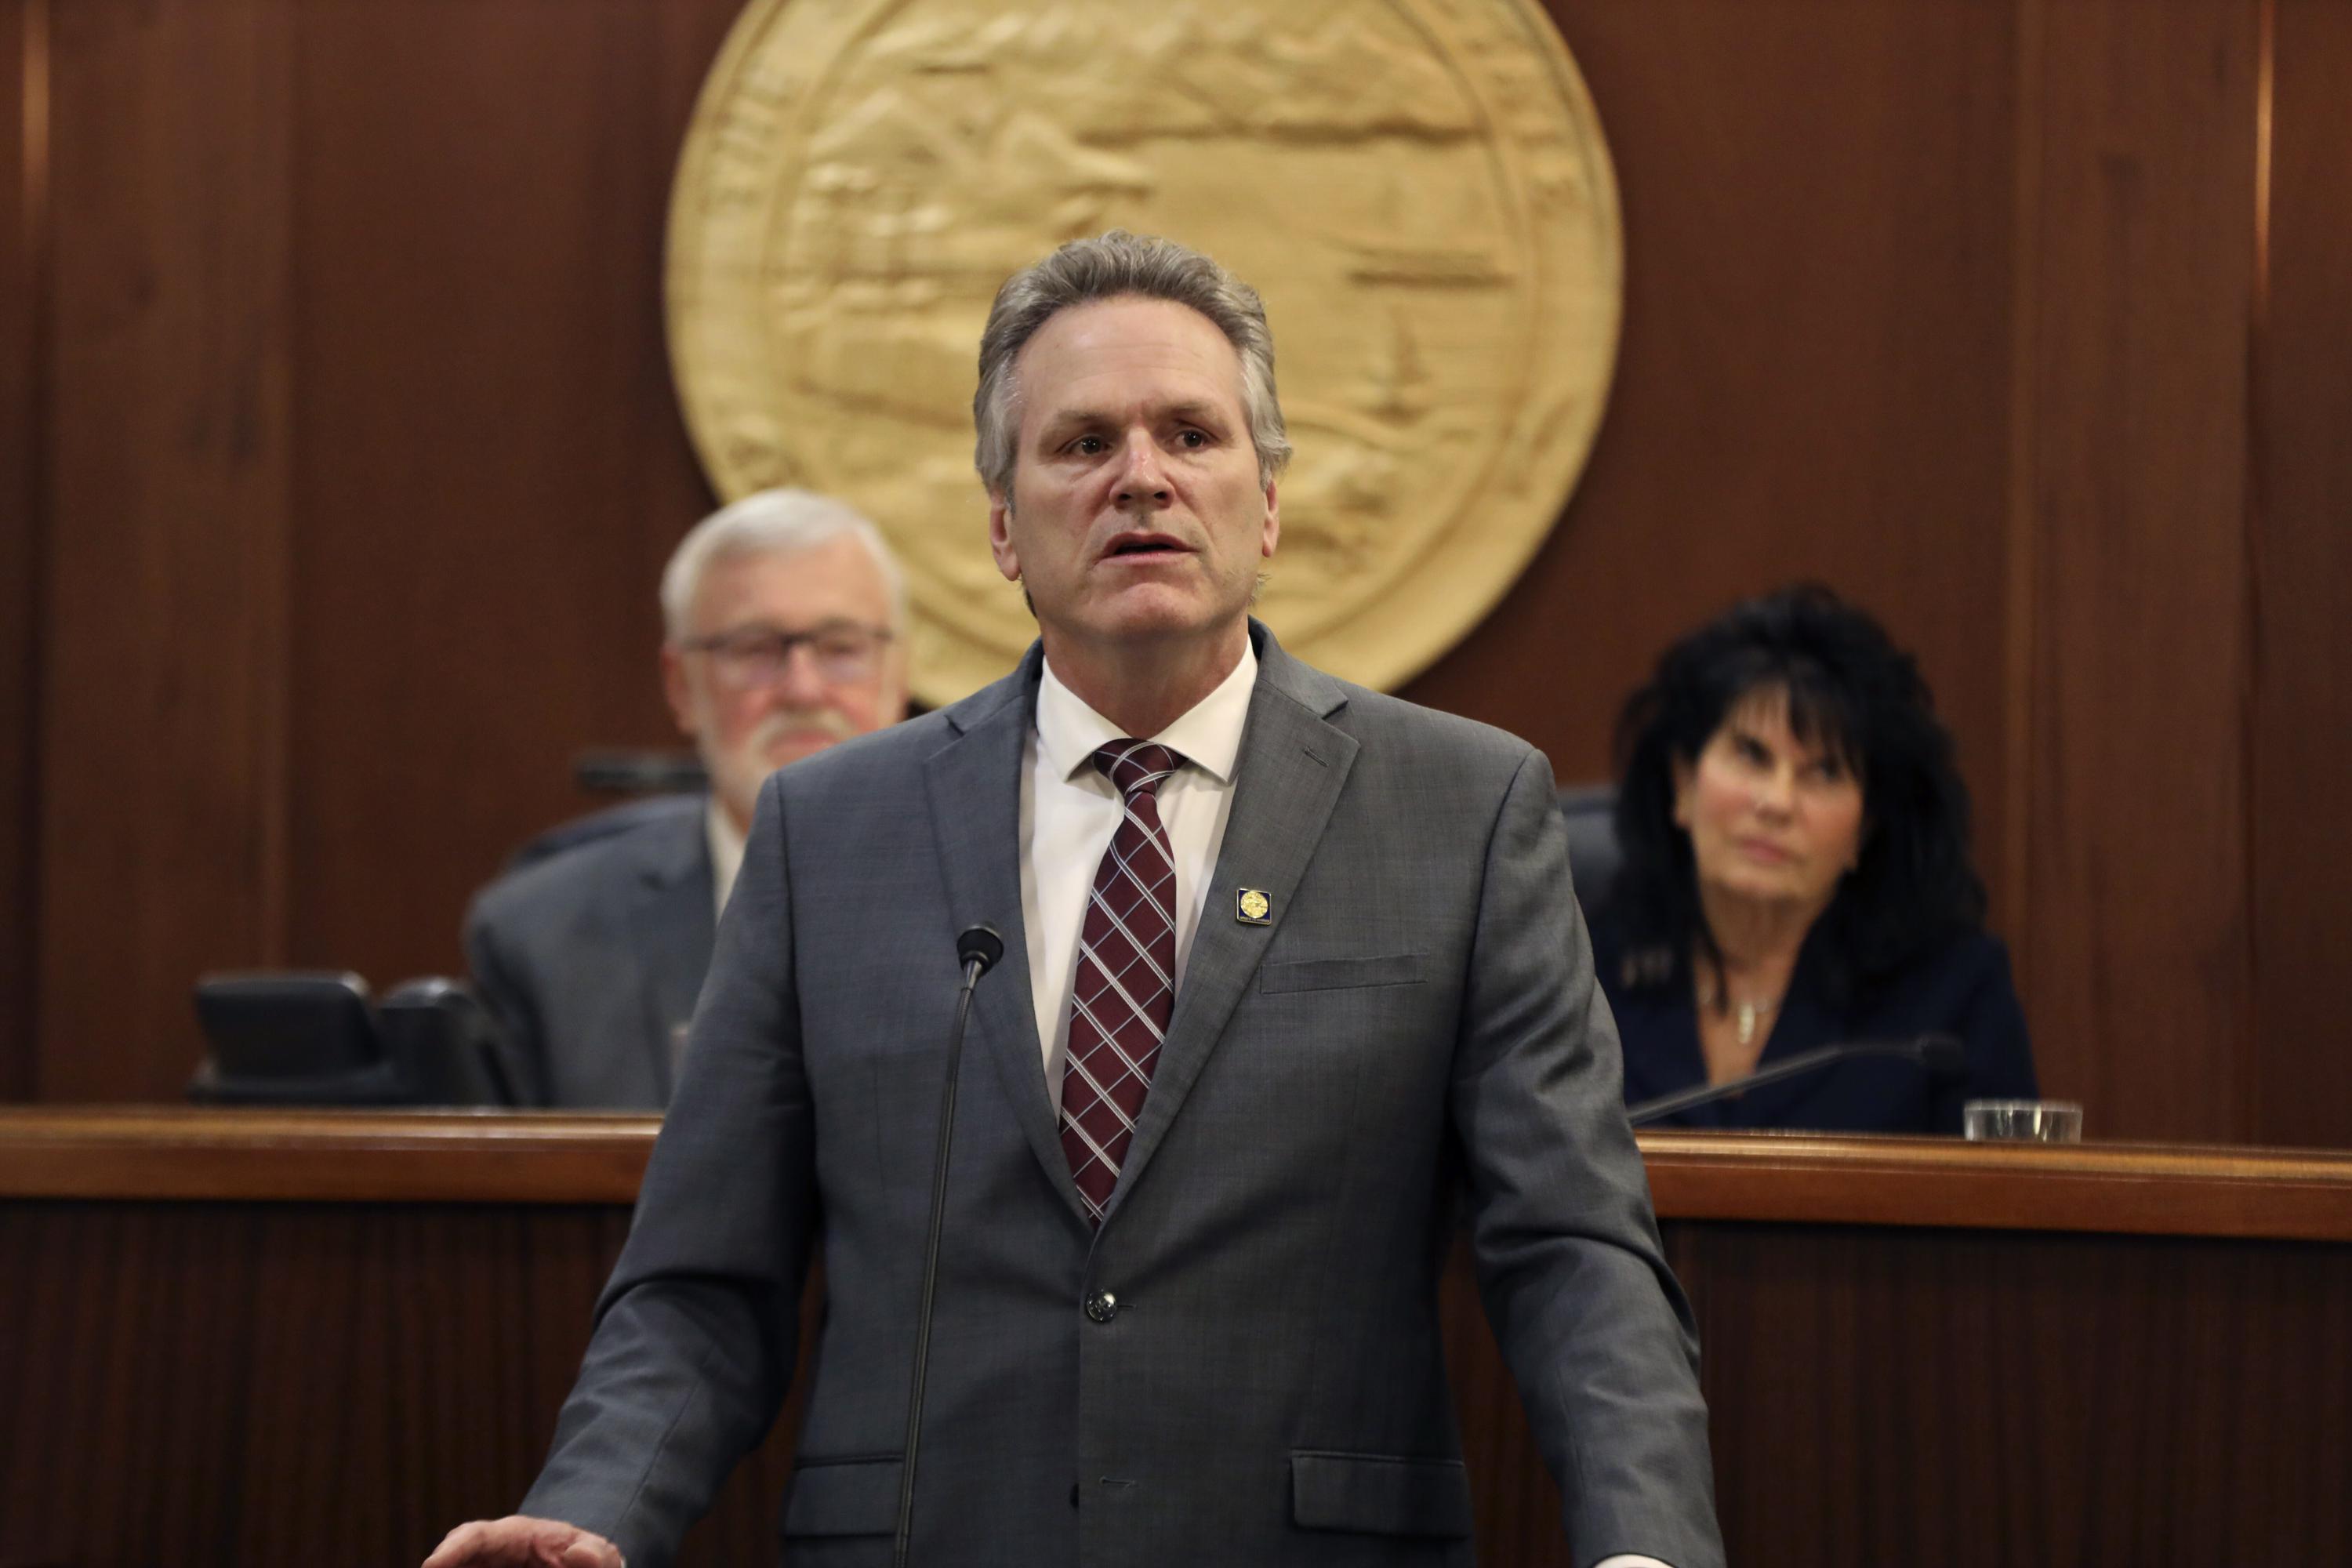 Alaska governor says he wants policies supporting families